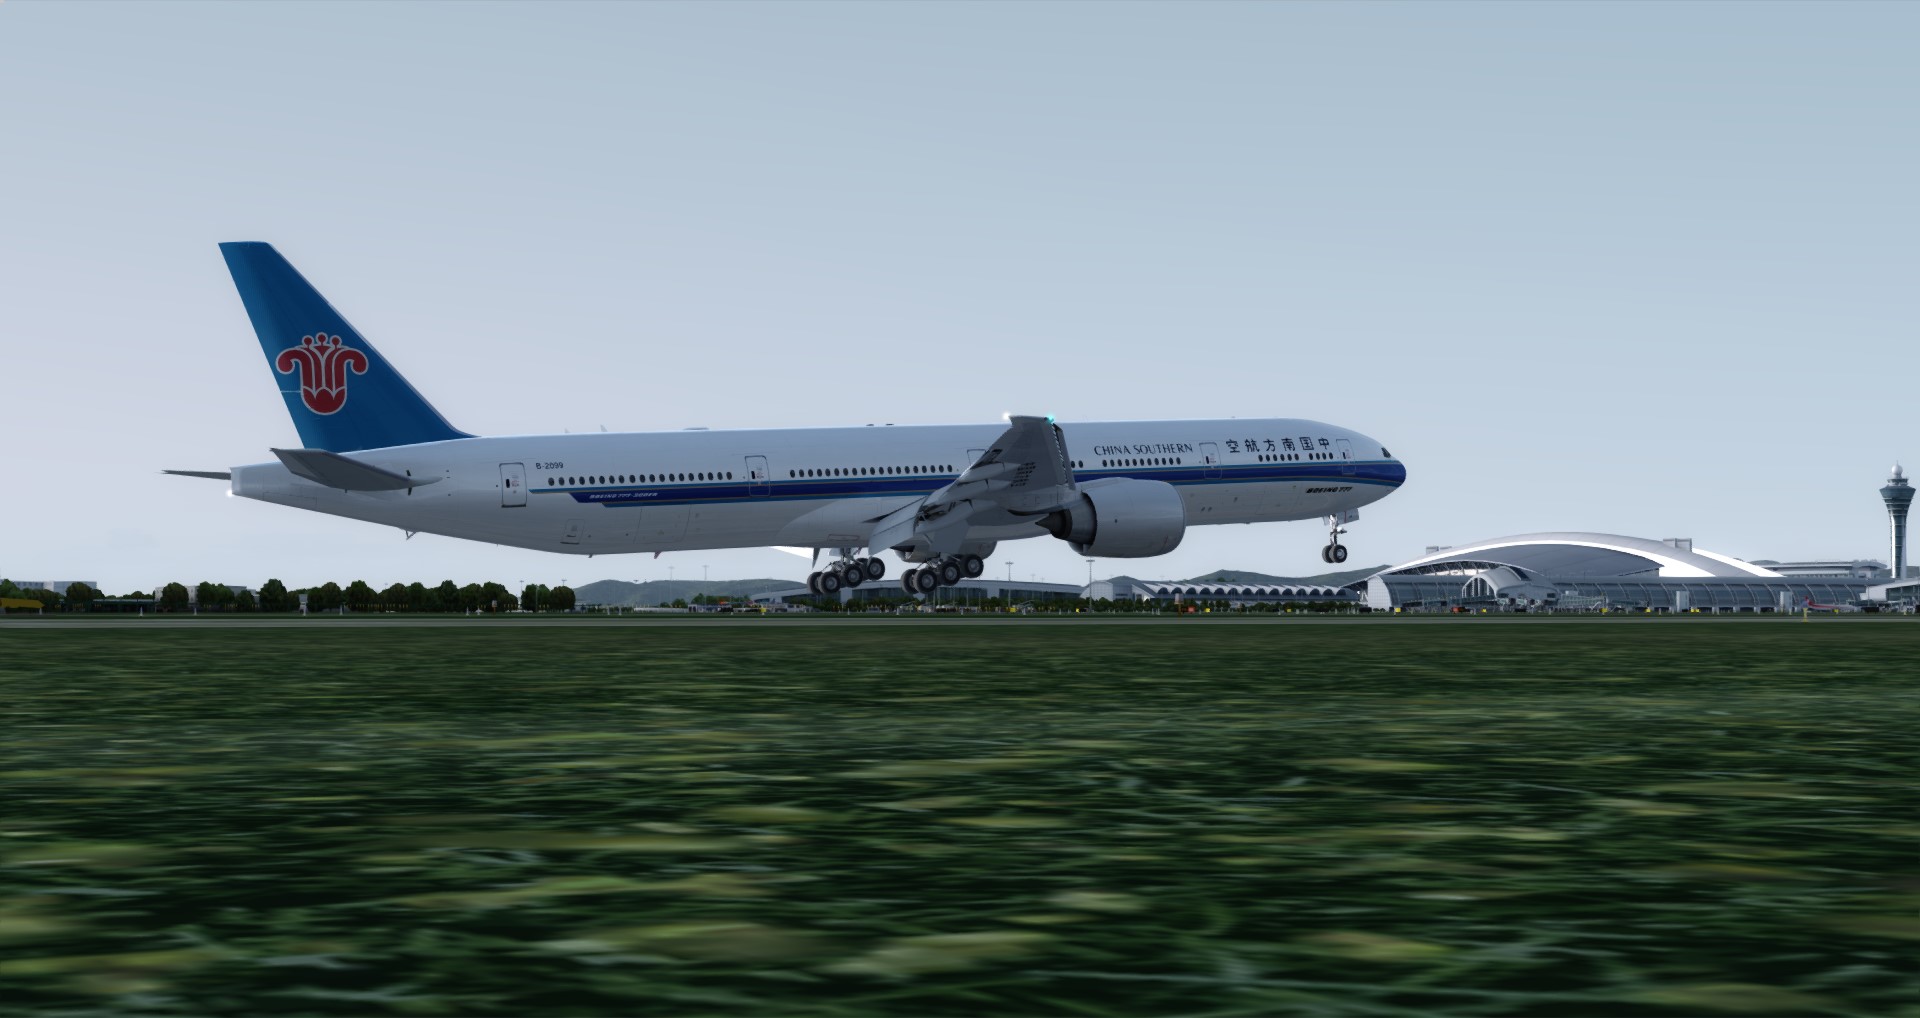 P3D V4 77W China Southern Airlines WADD-ZGGG 营救同胞-3099 